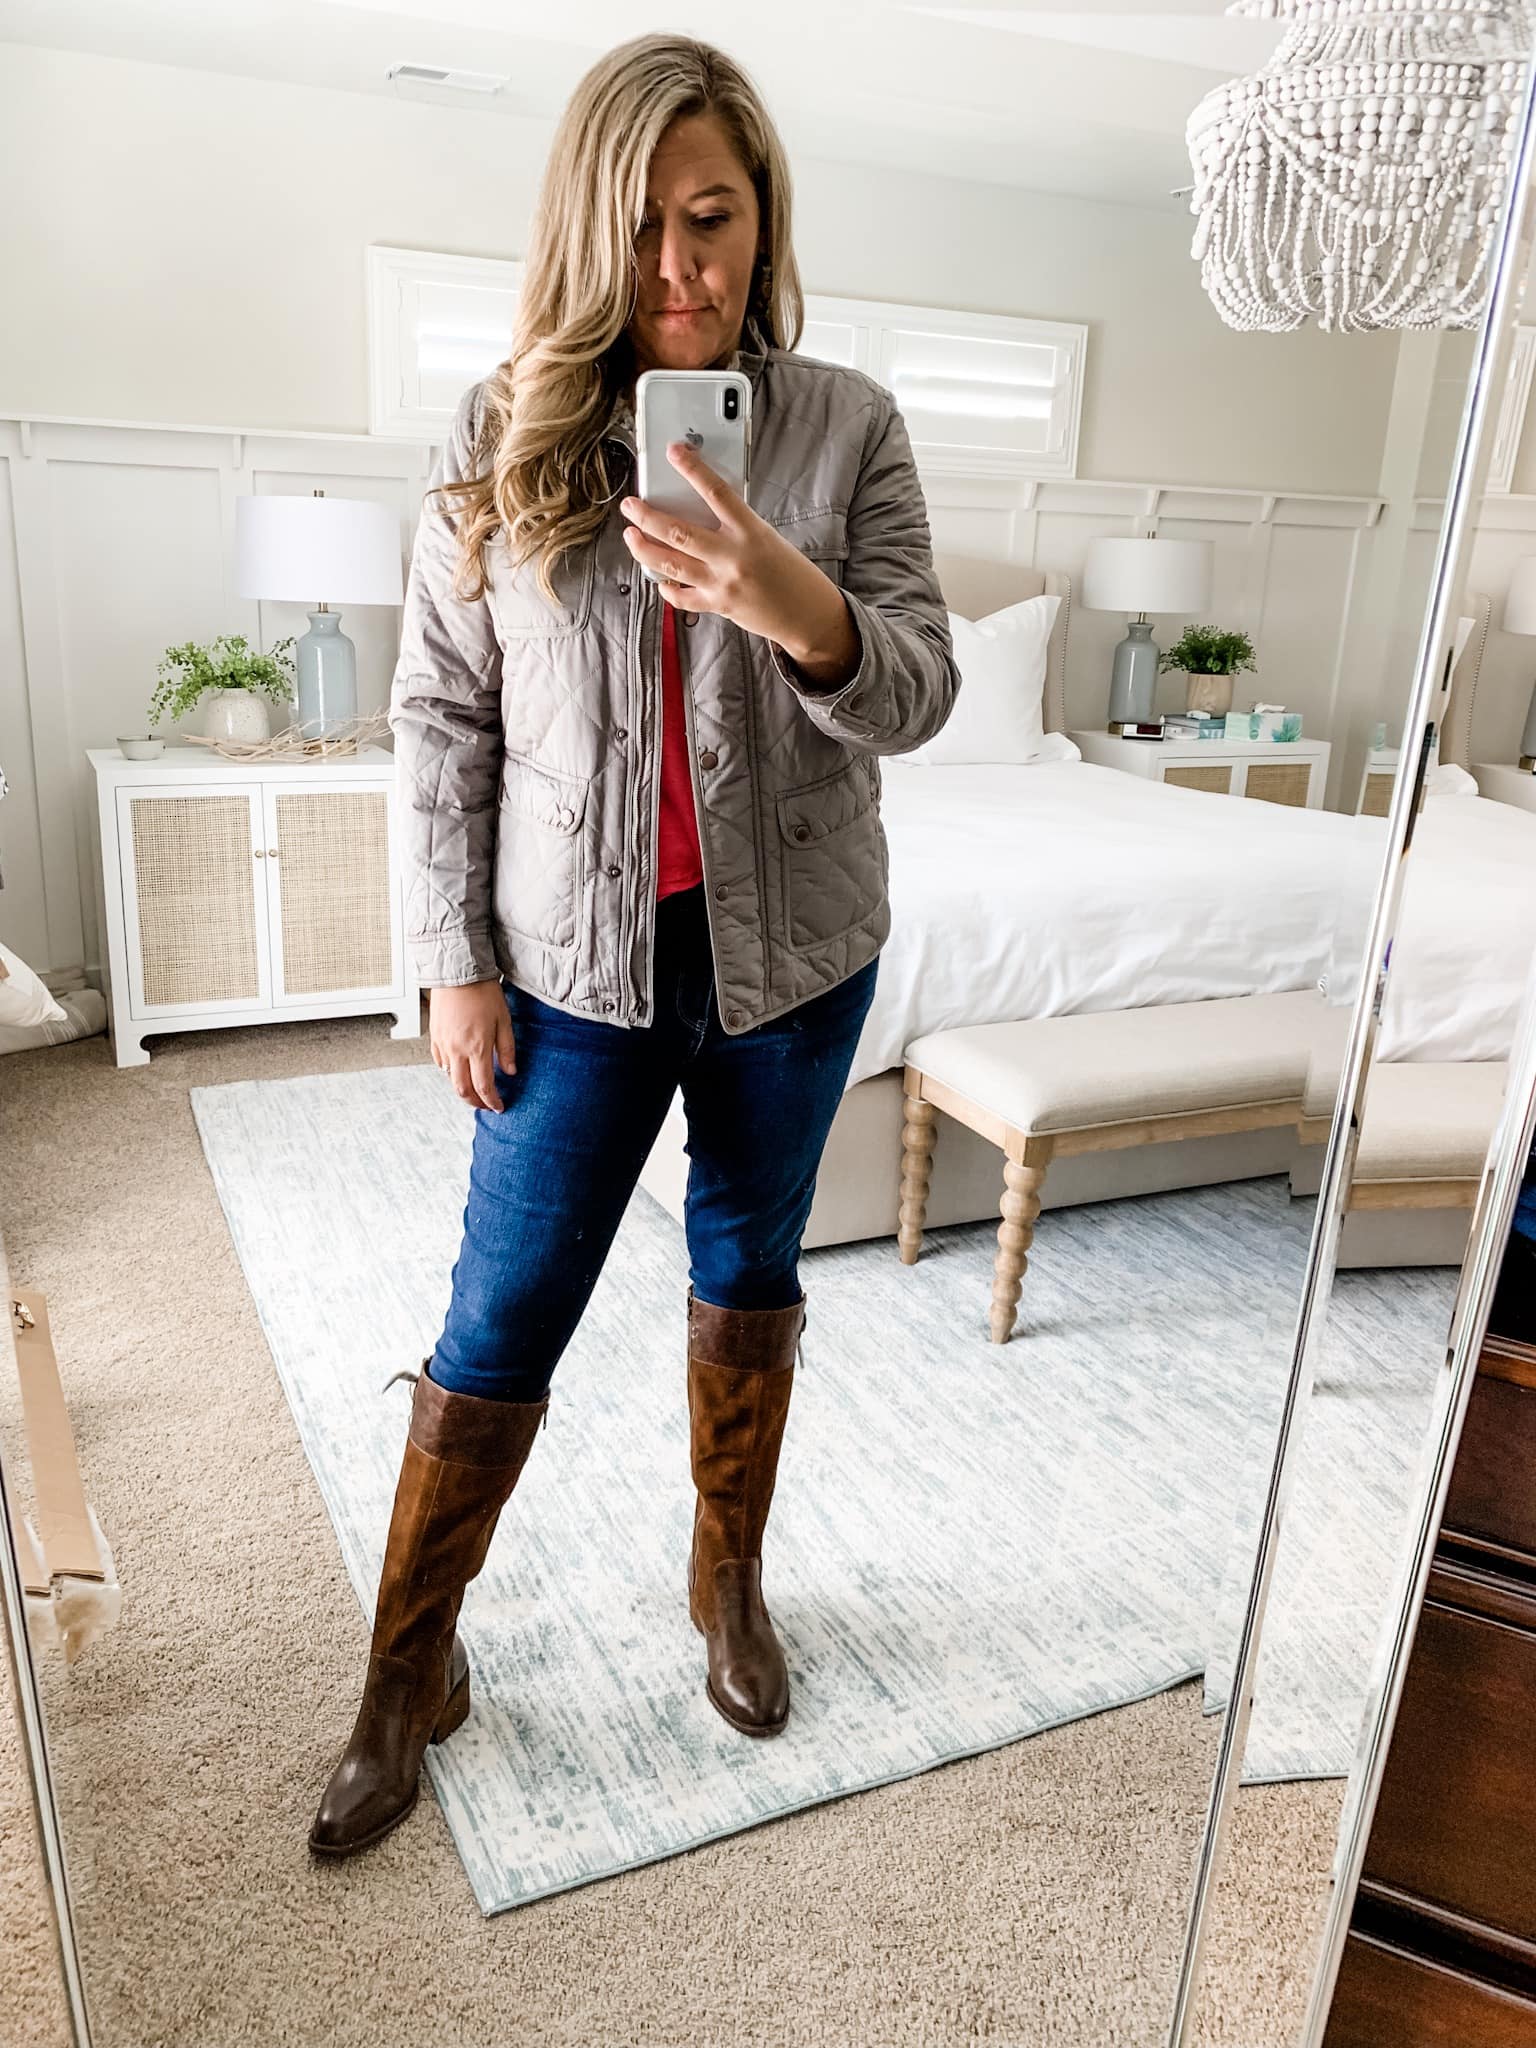 2019 Nordstrom Anniversary Sale: What I Ordered, Loved and Returned ...